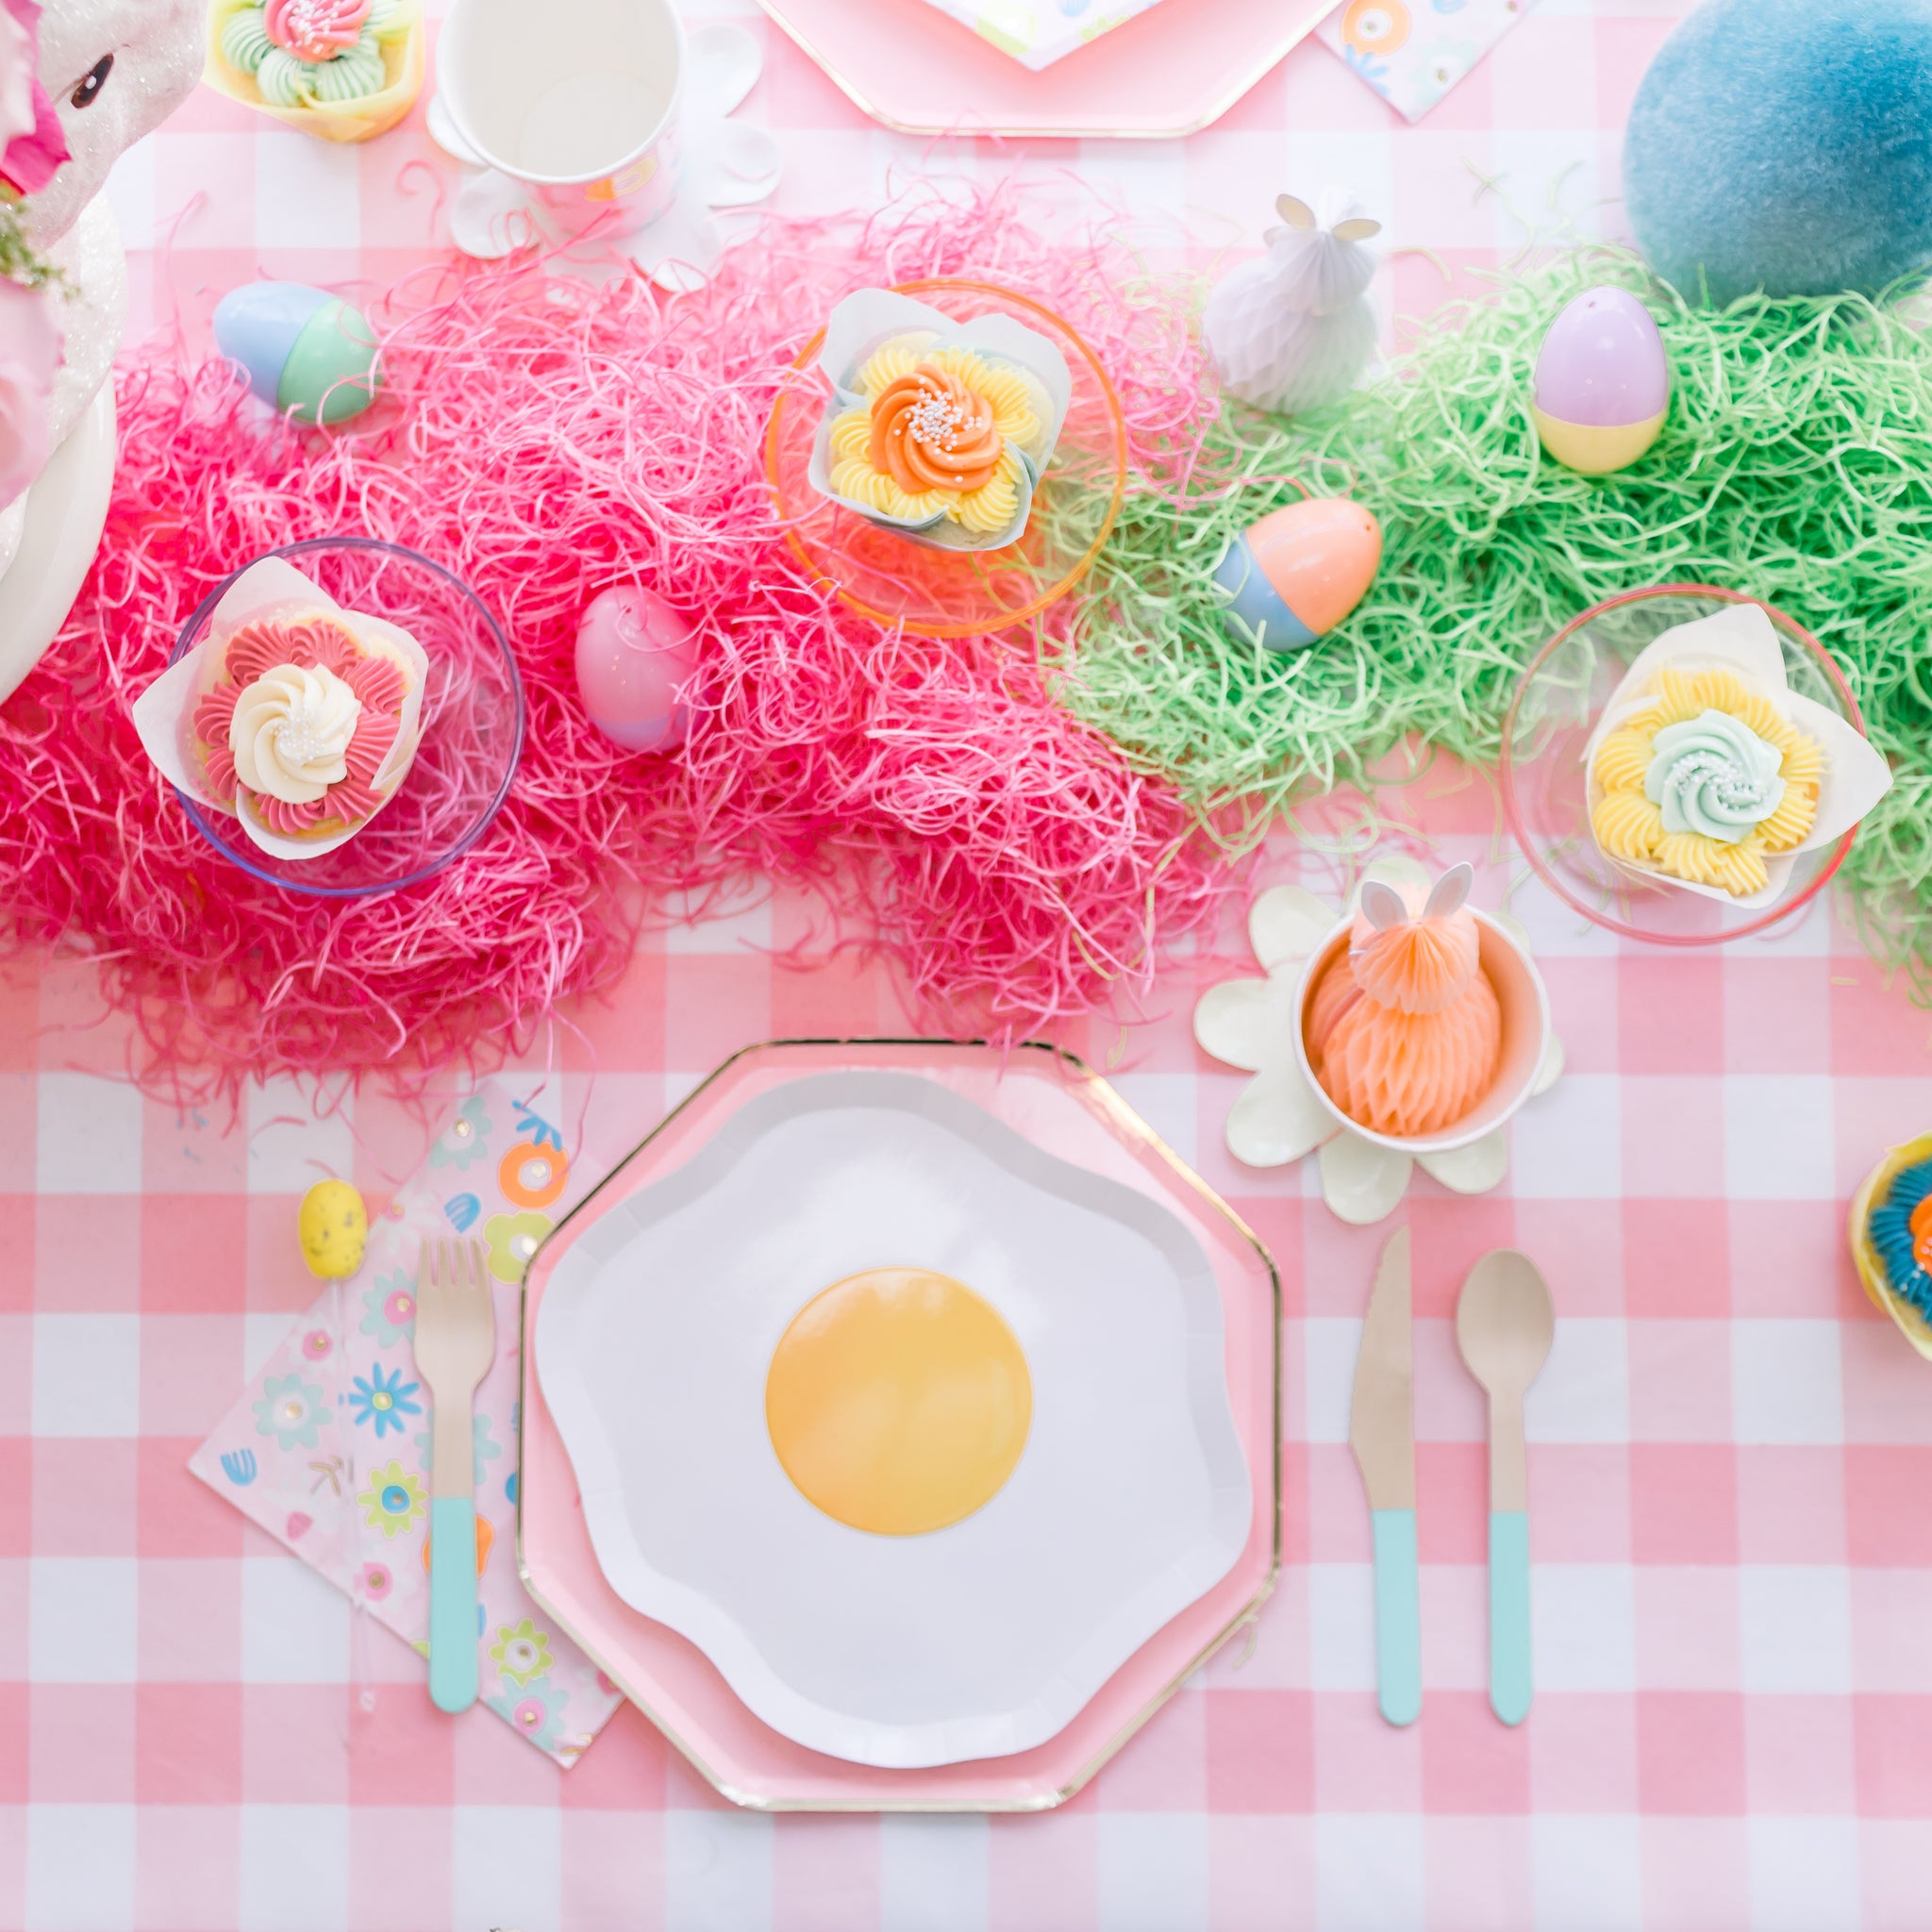 Easter table setting ideas using an egg yolk plate and plaid party supplies. 